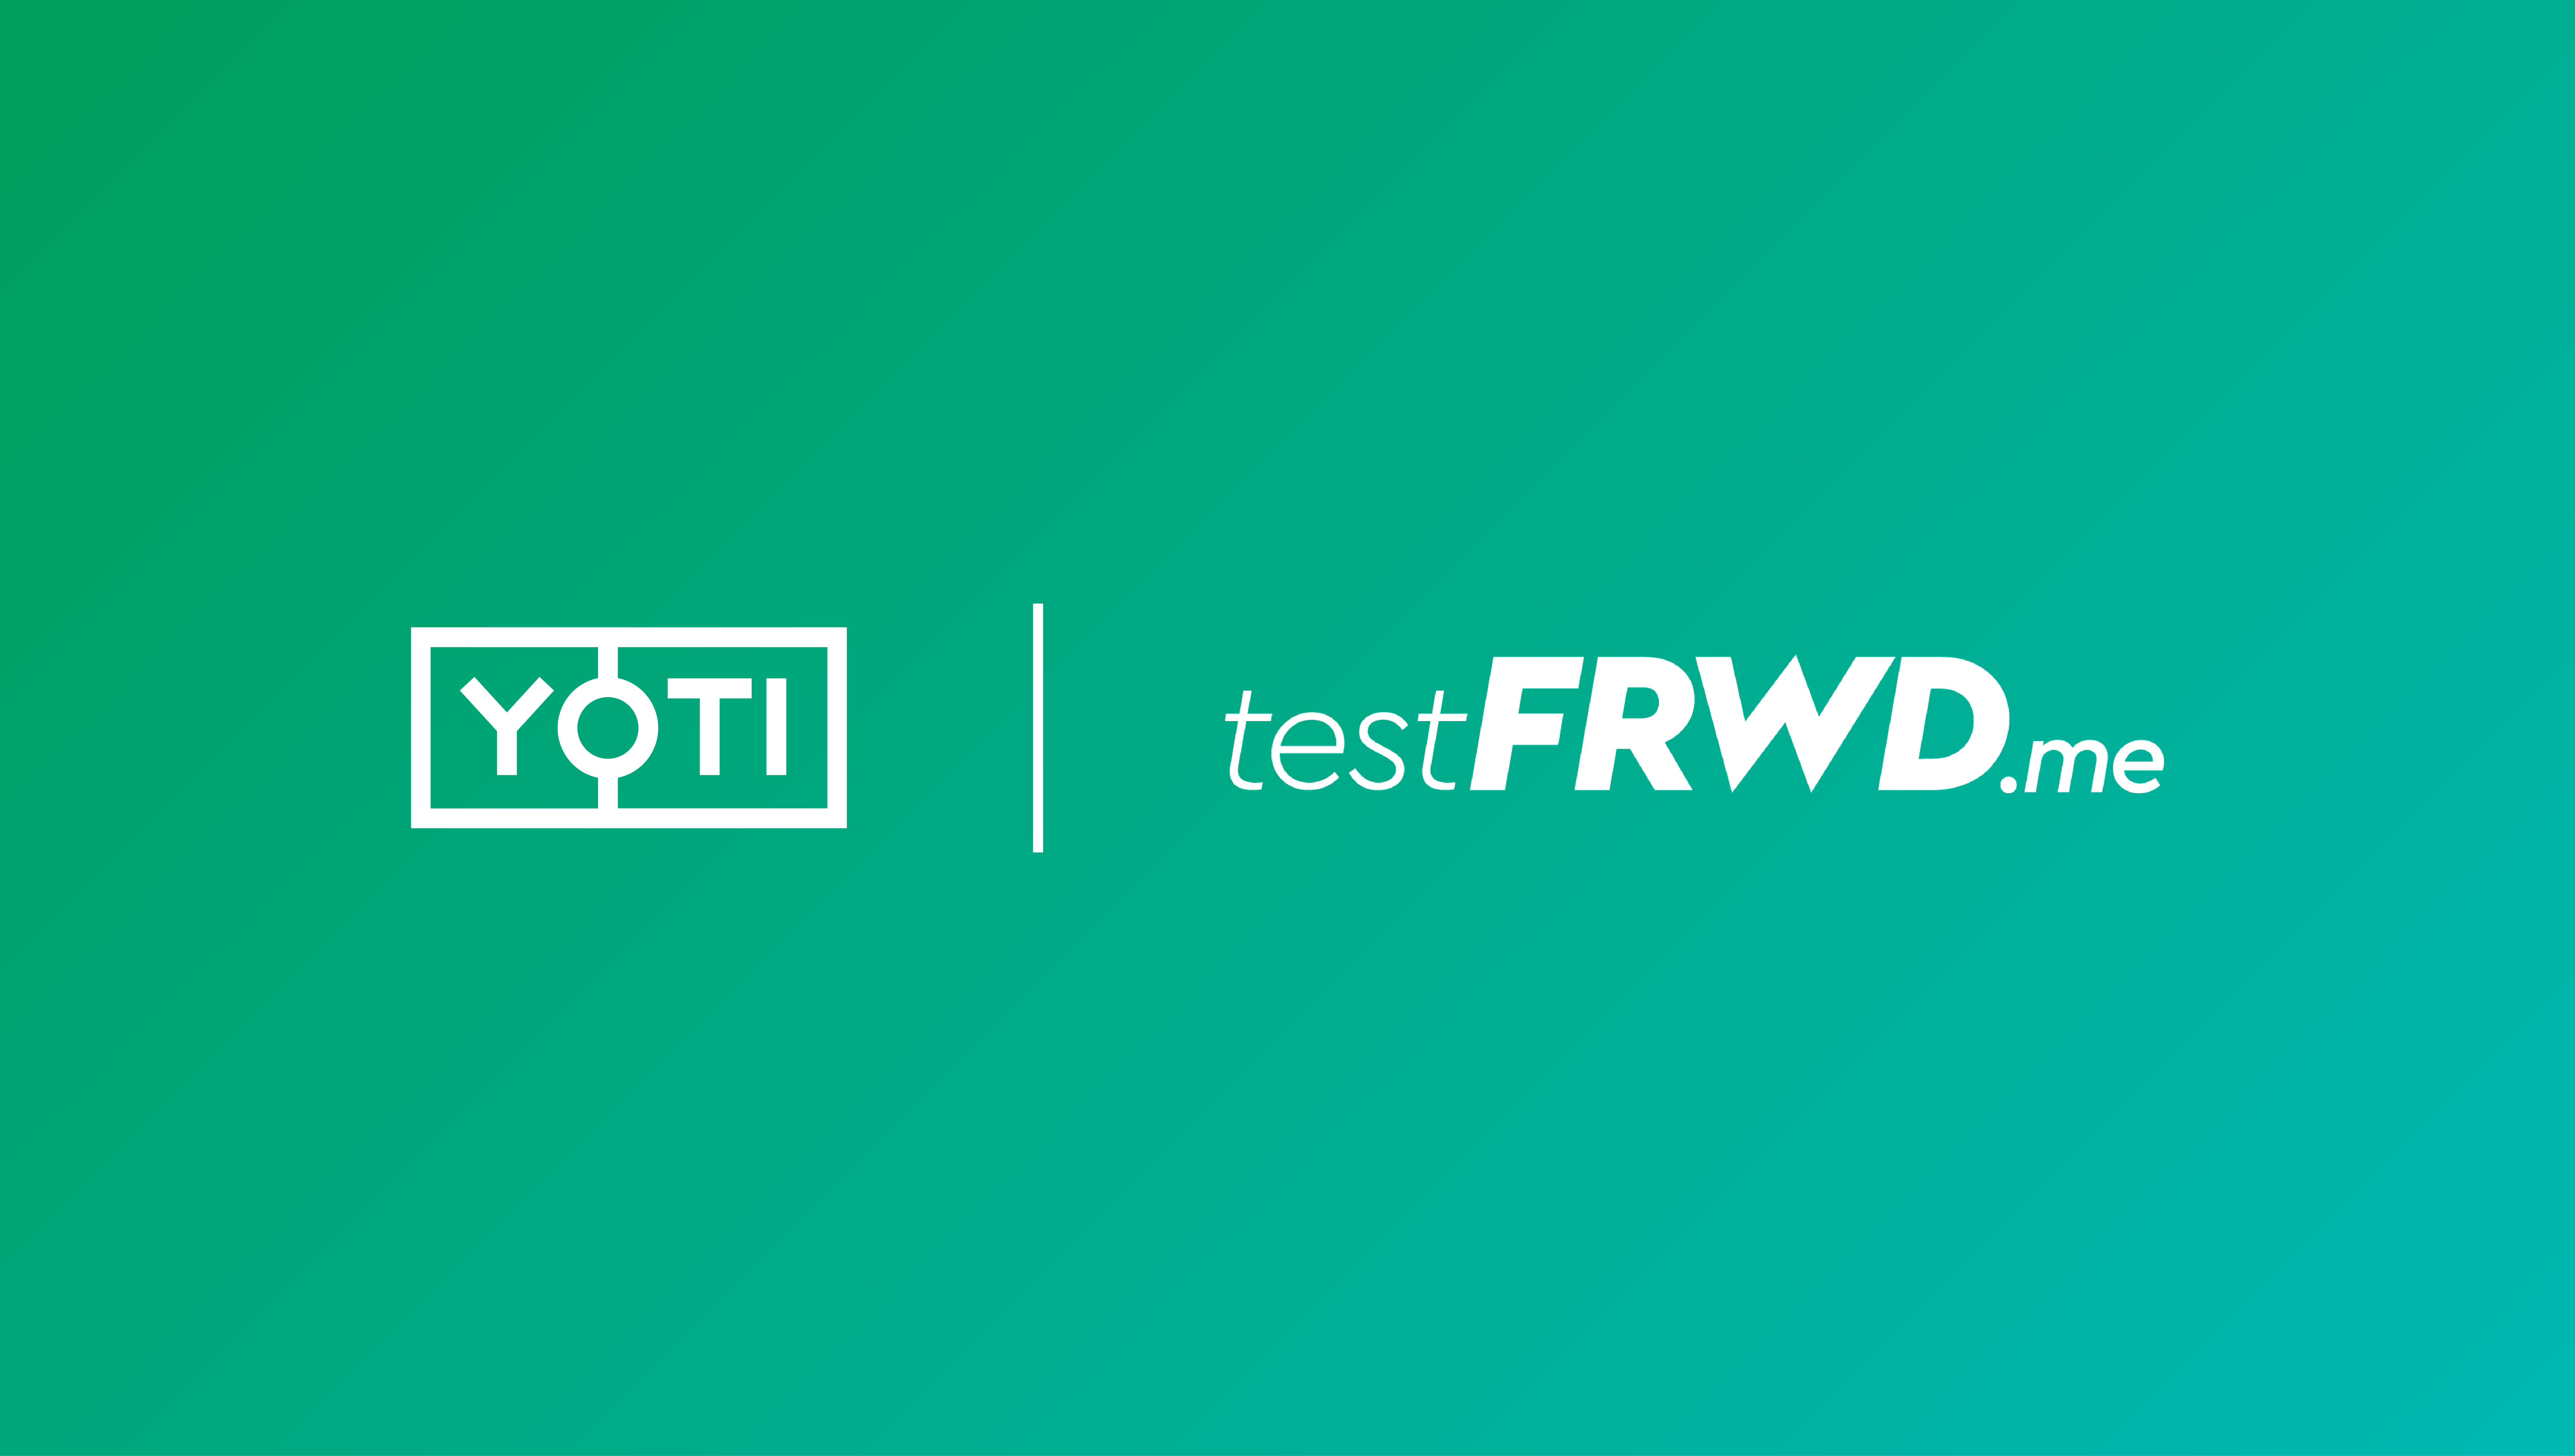 Yoti and Testfrwd logos presented together